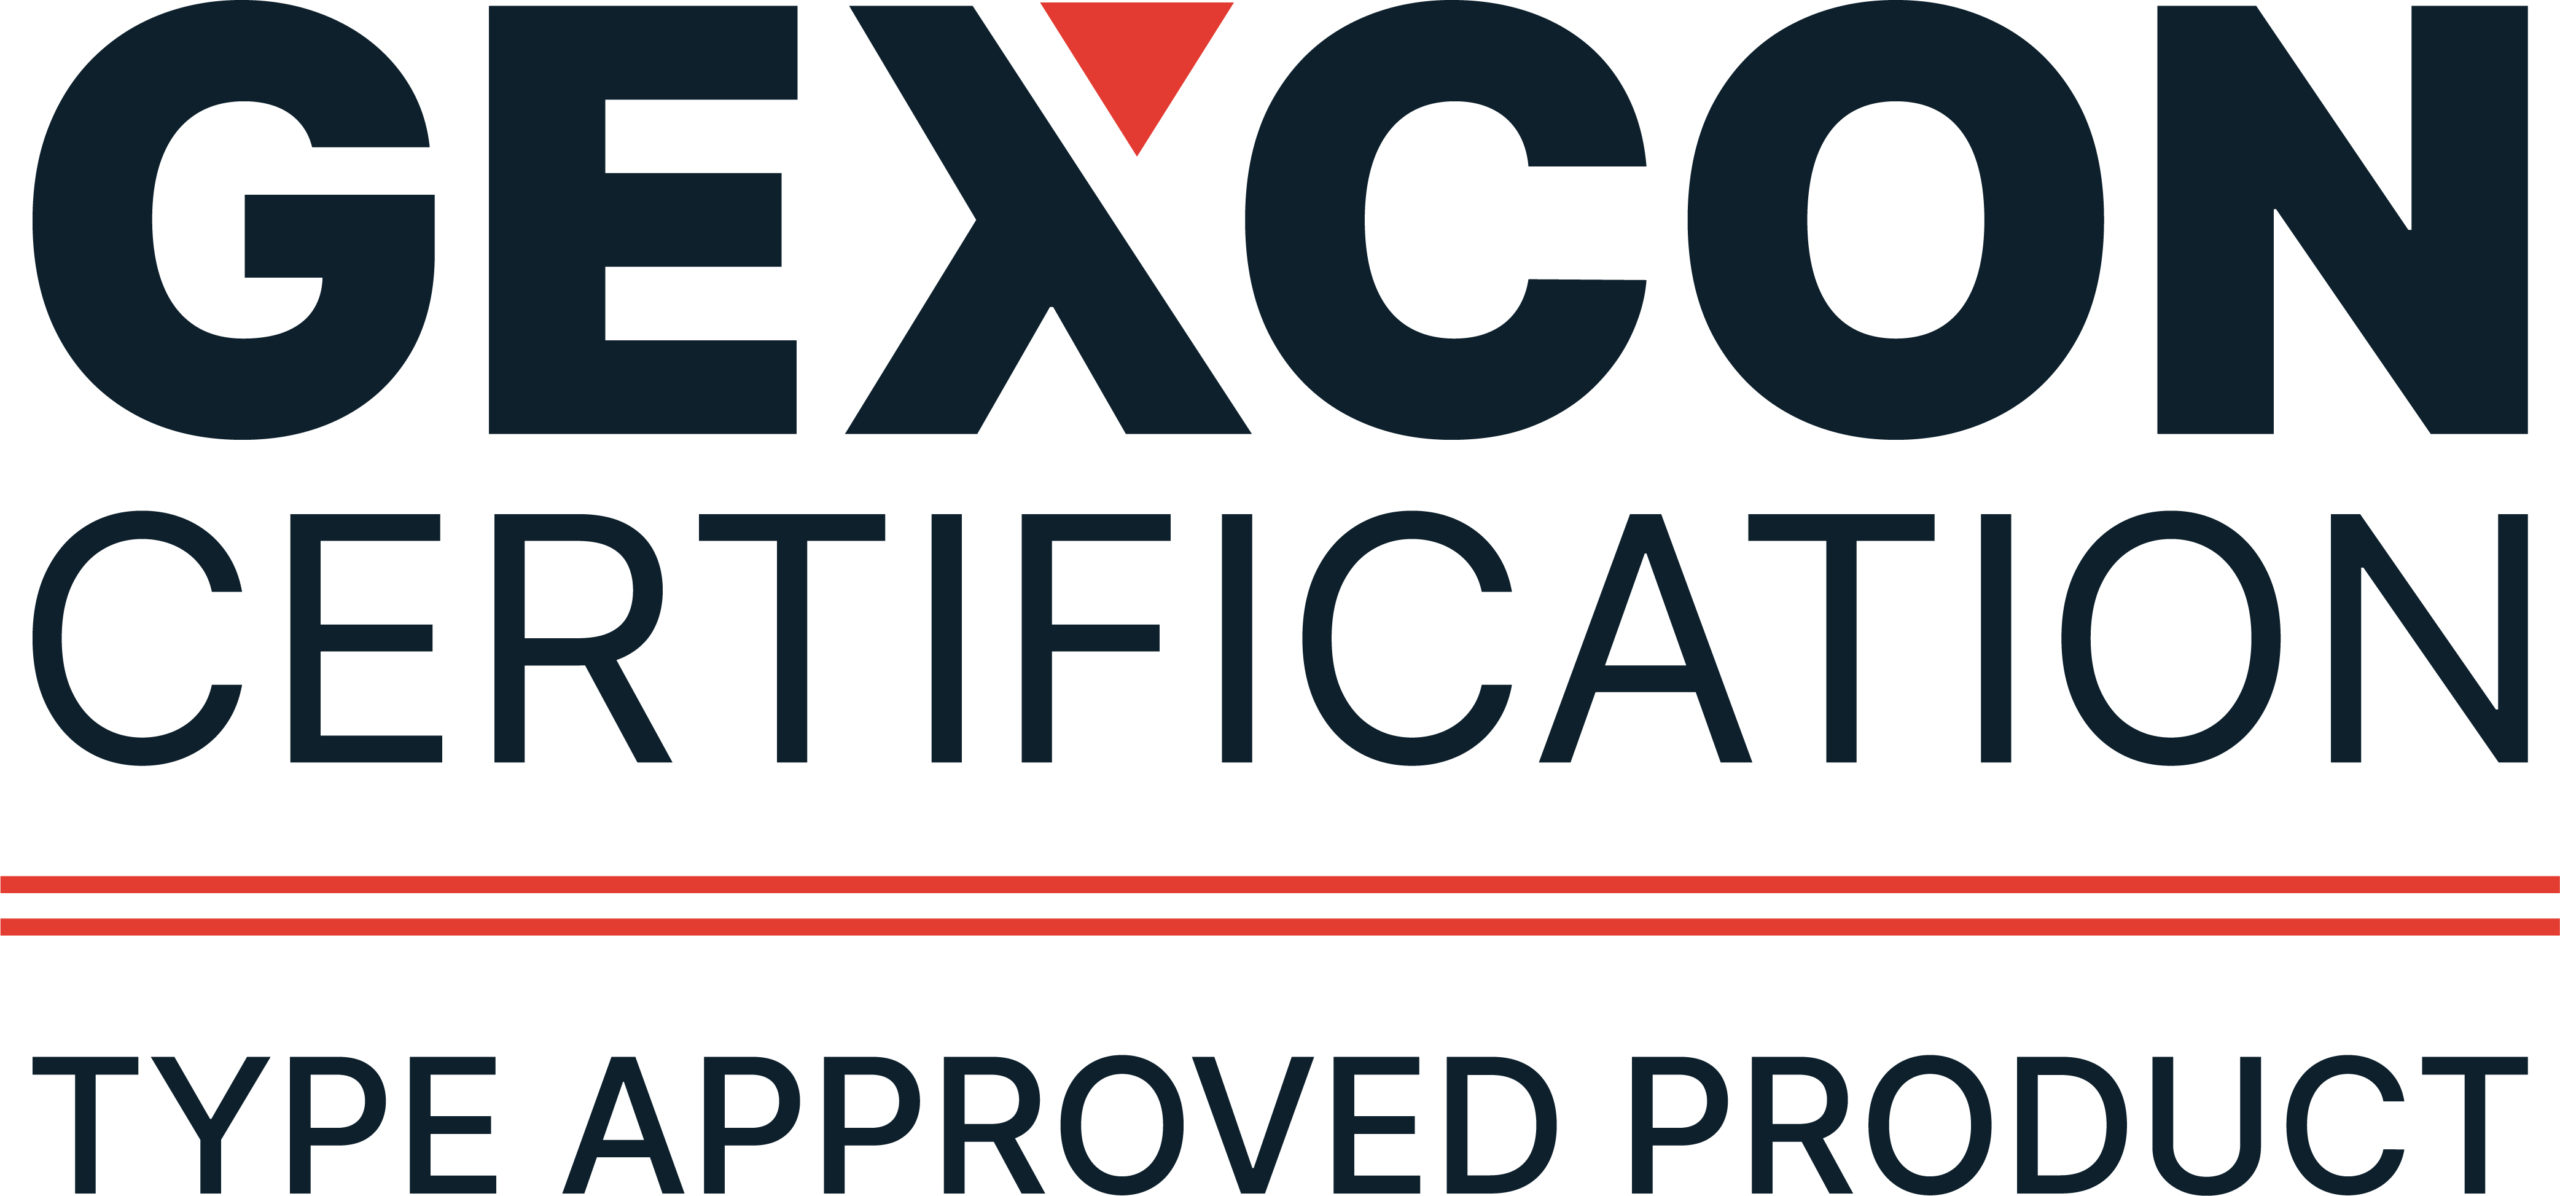 Gexcon Certification Logo - Type Approved Product kopi